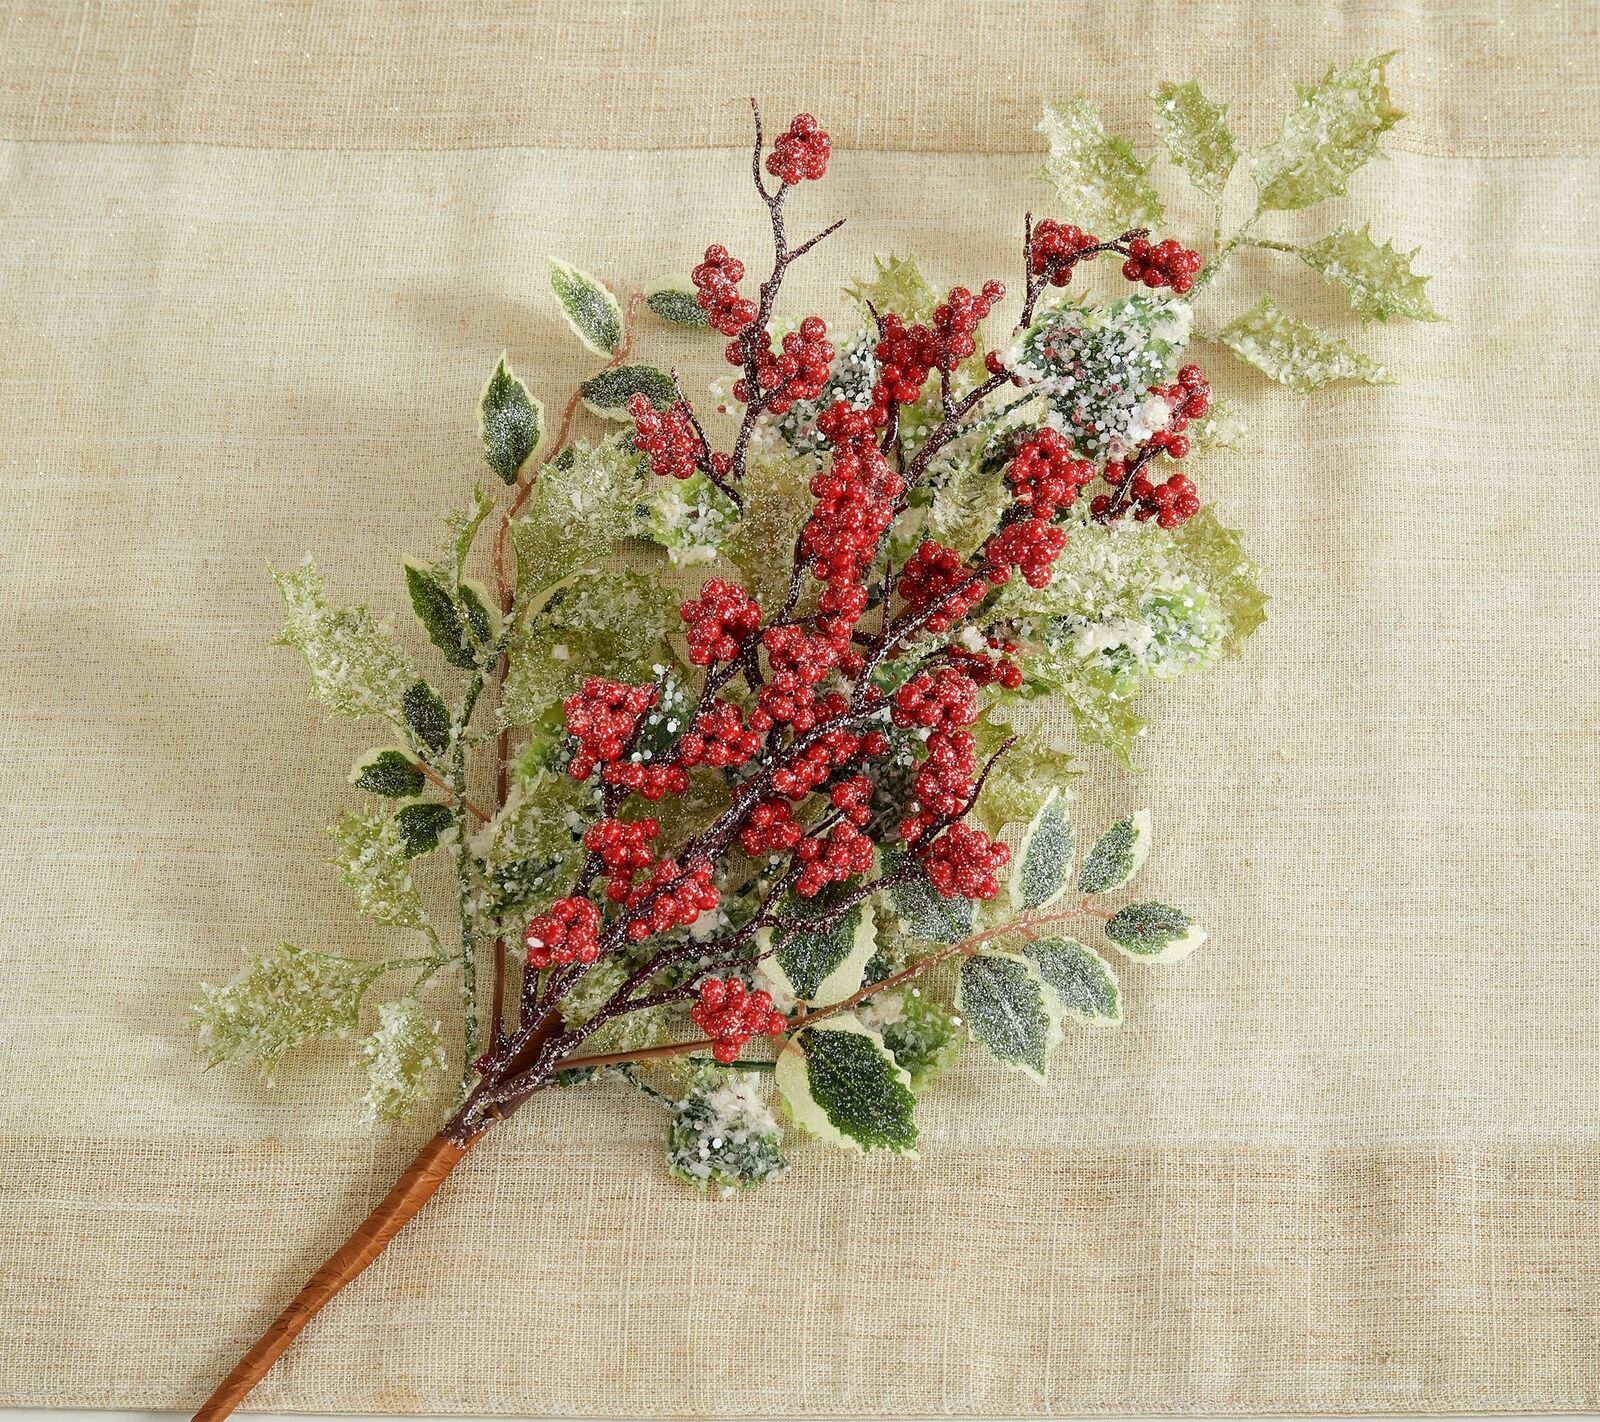 Set of 4 froted Holly Berry Stems by Valerie in Red - $43.64